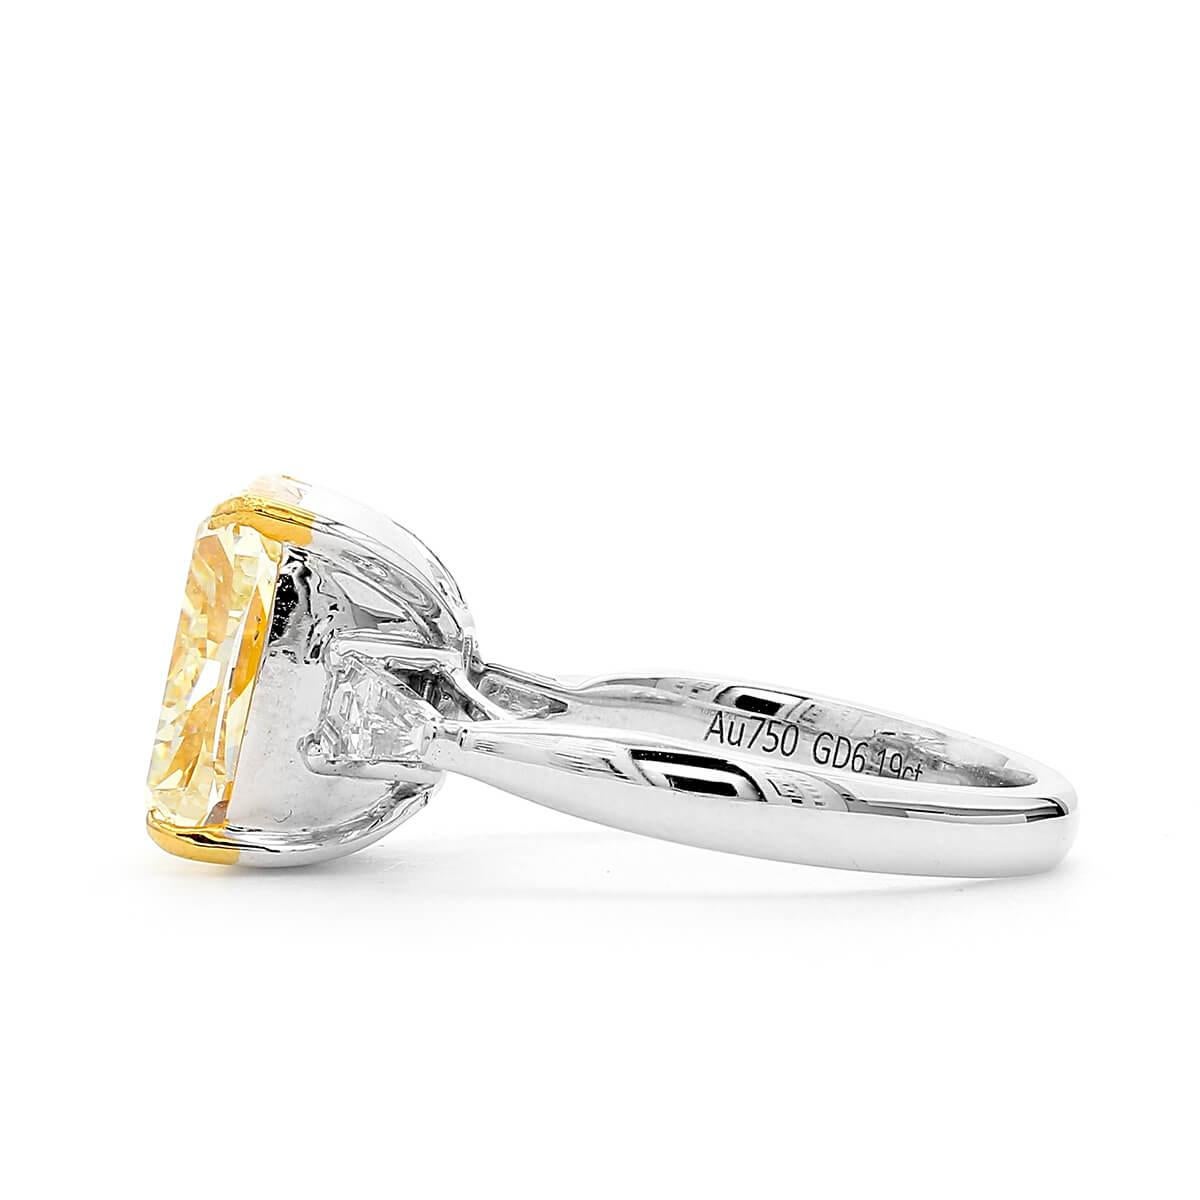 Natural, untreated 6.19 carat main light yellow diamond, surrounded by smaller white diamonds making up a total of 6.56 Carats. Cushion Shape. This piece has been expertly crafted using 18 Karat White Gold. 

This piece can be adjusted or resized.